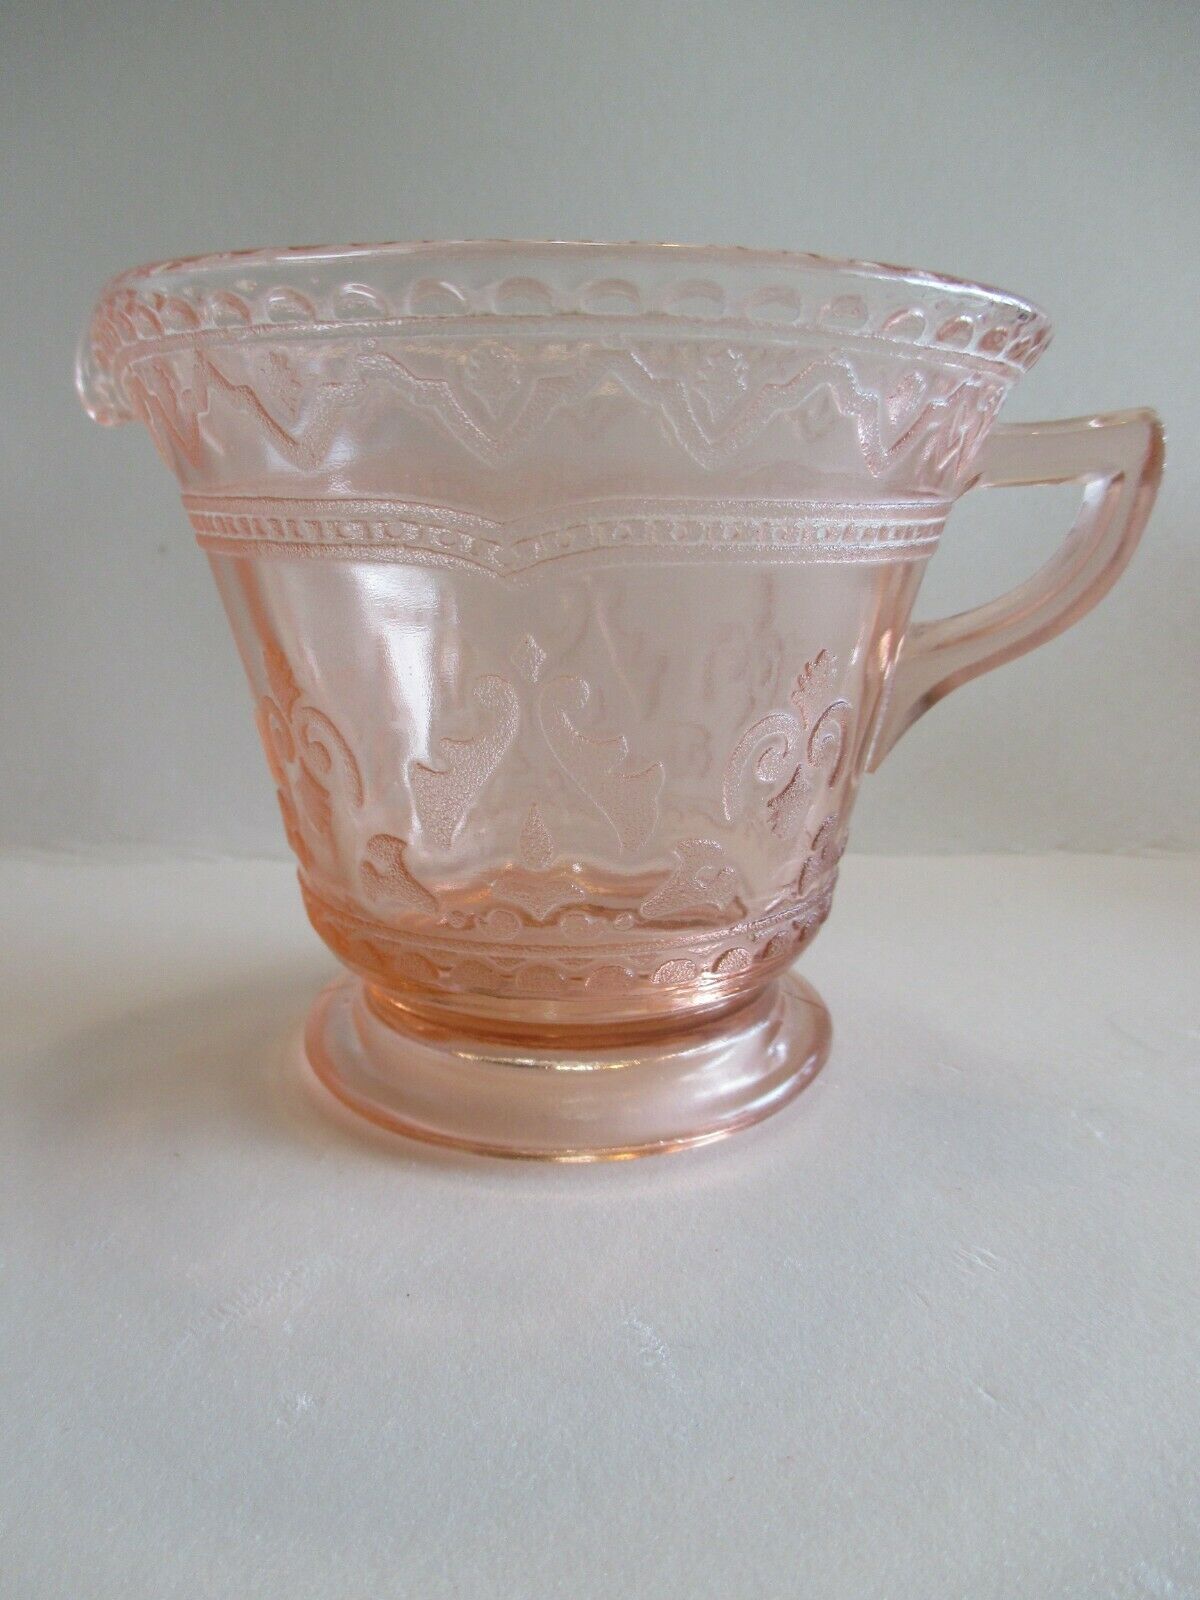 Federal Glass Co. Pink Depression Glass Footed Creamer-patrician Spoke Pattern